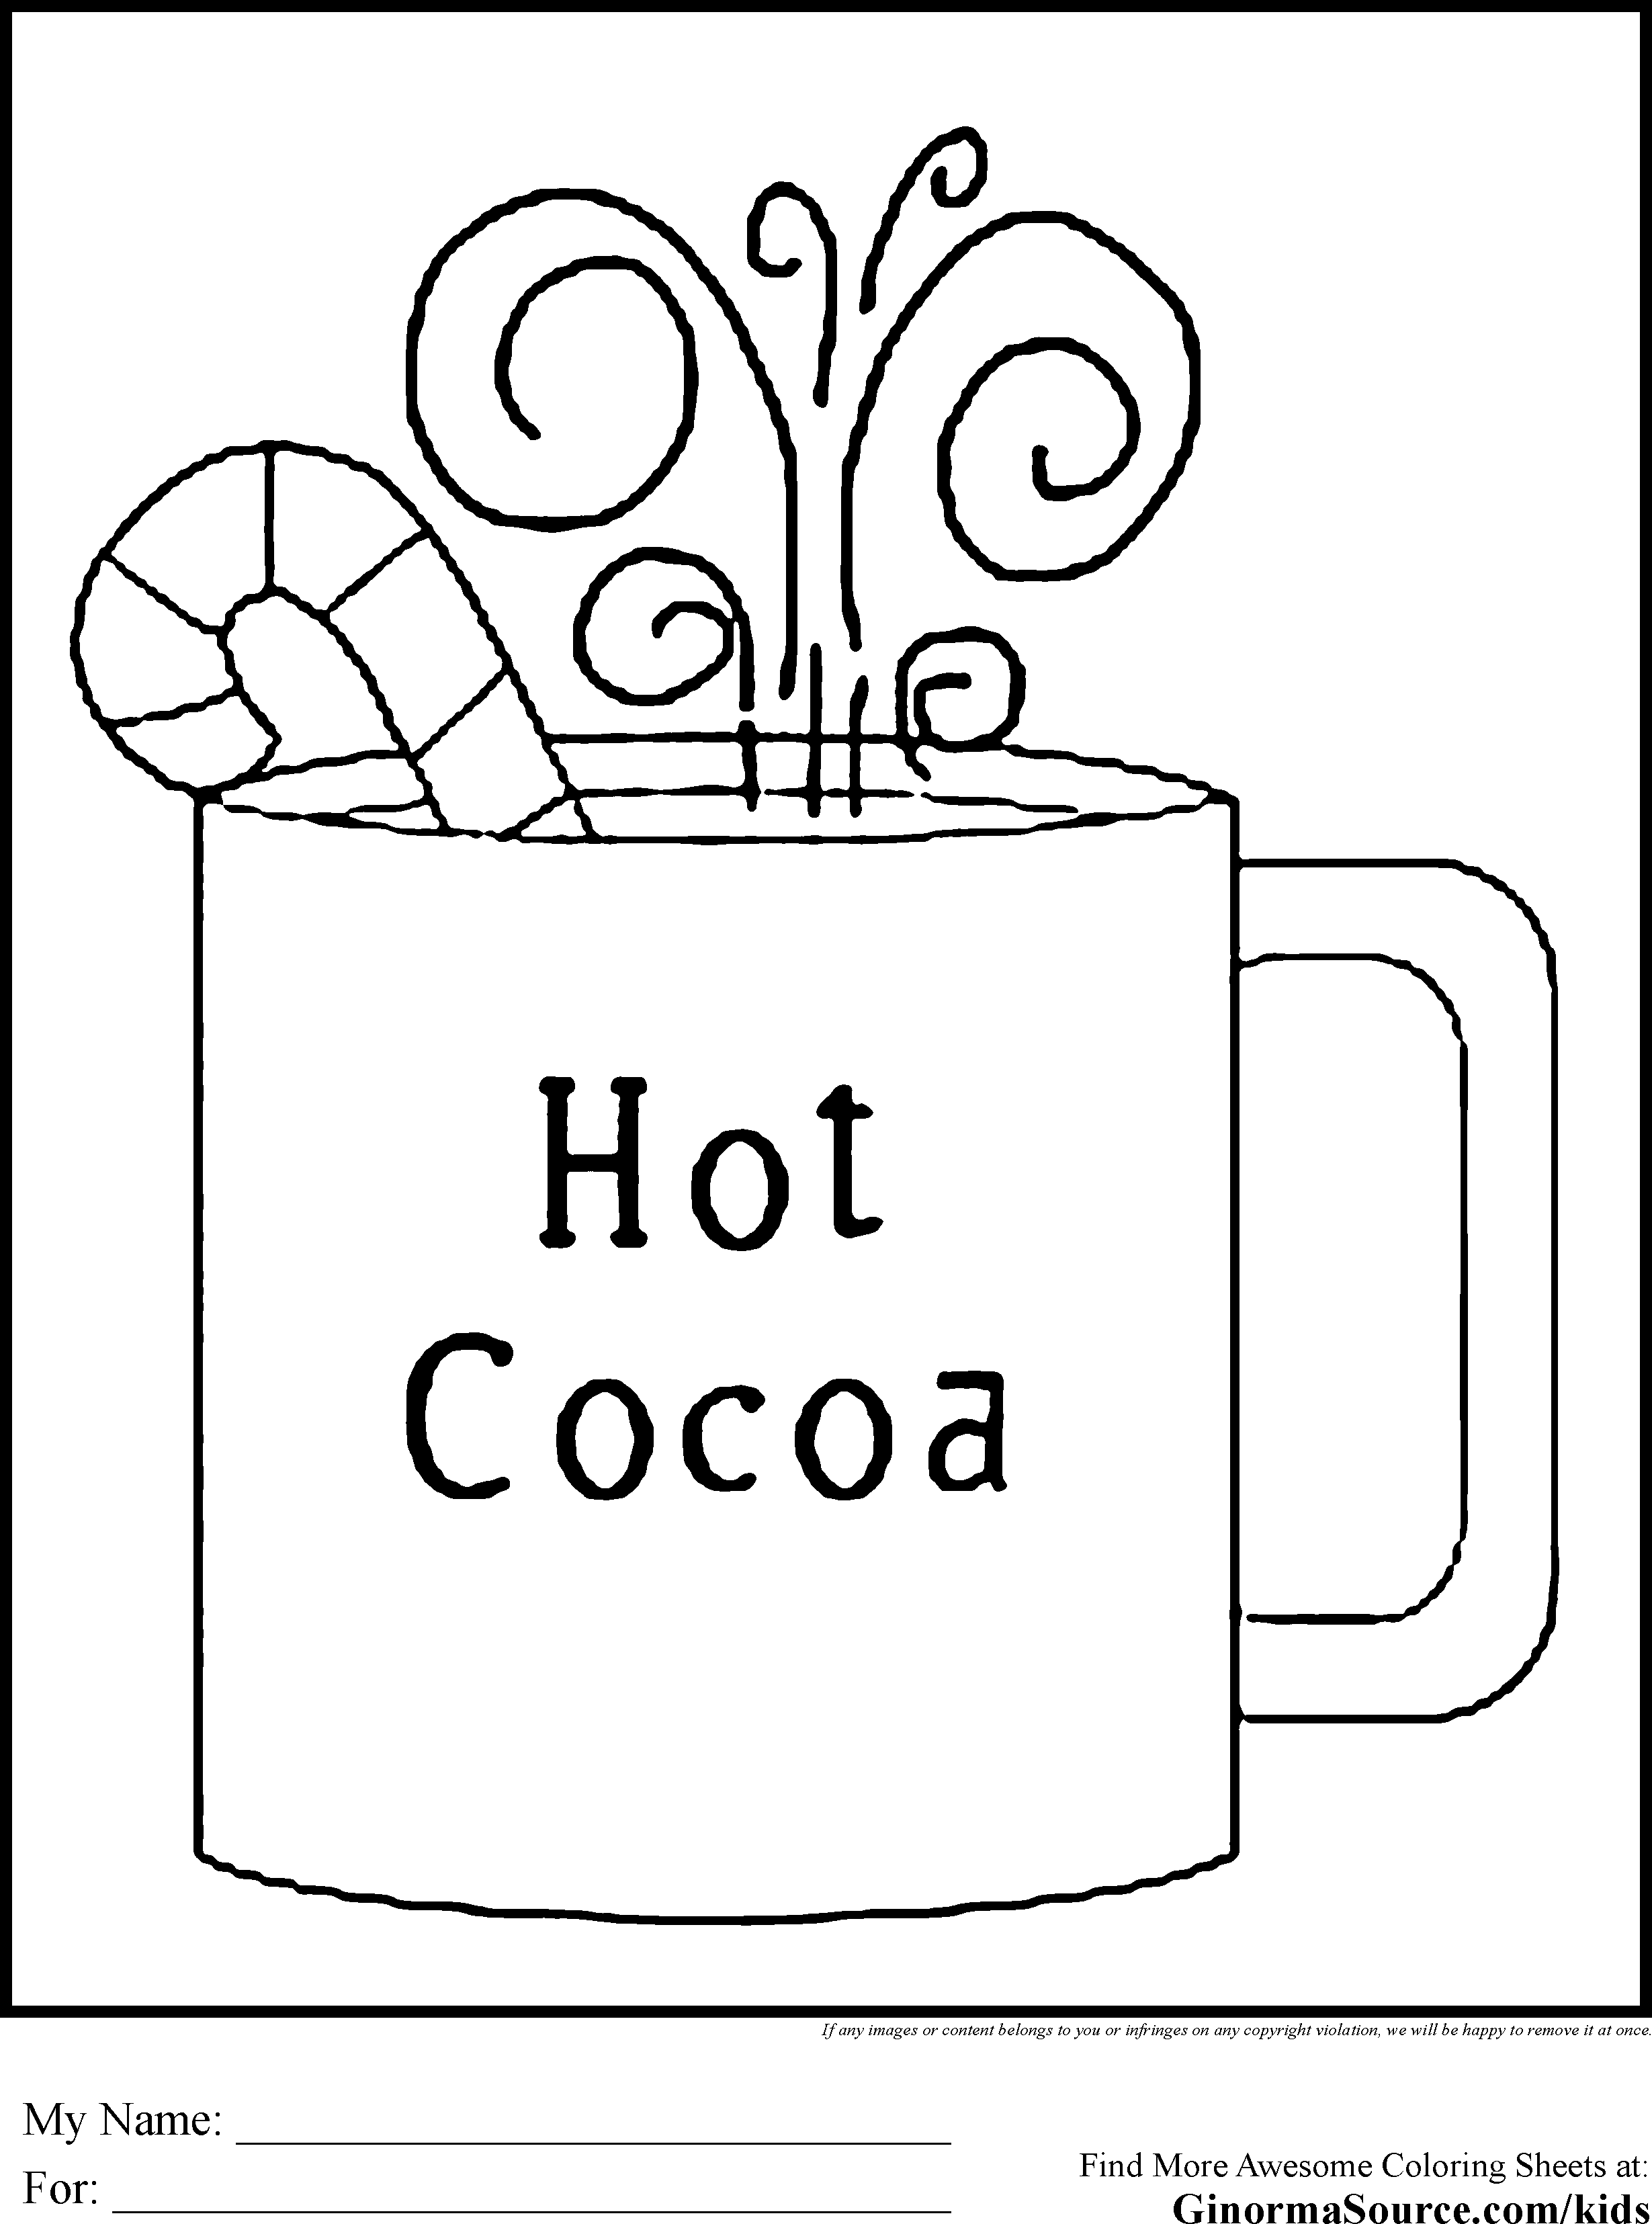  Preschool Winter Holiday Coloring Pages - Winter Holiday